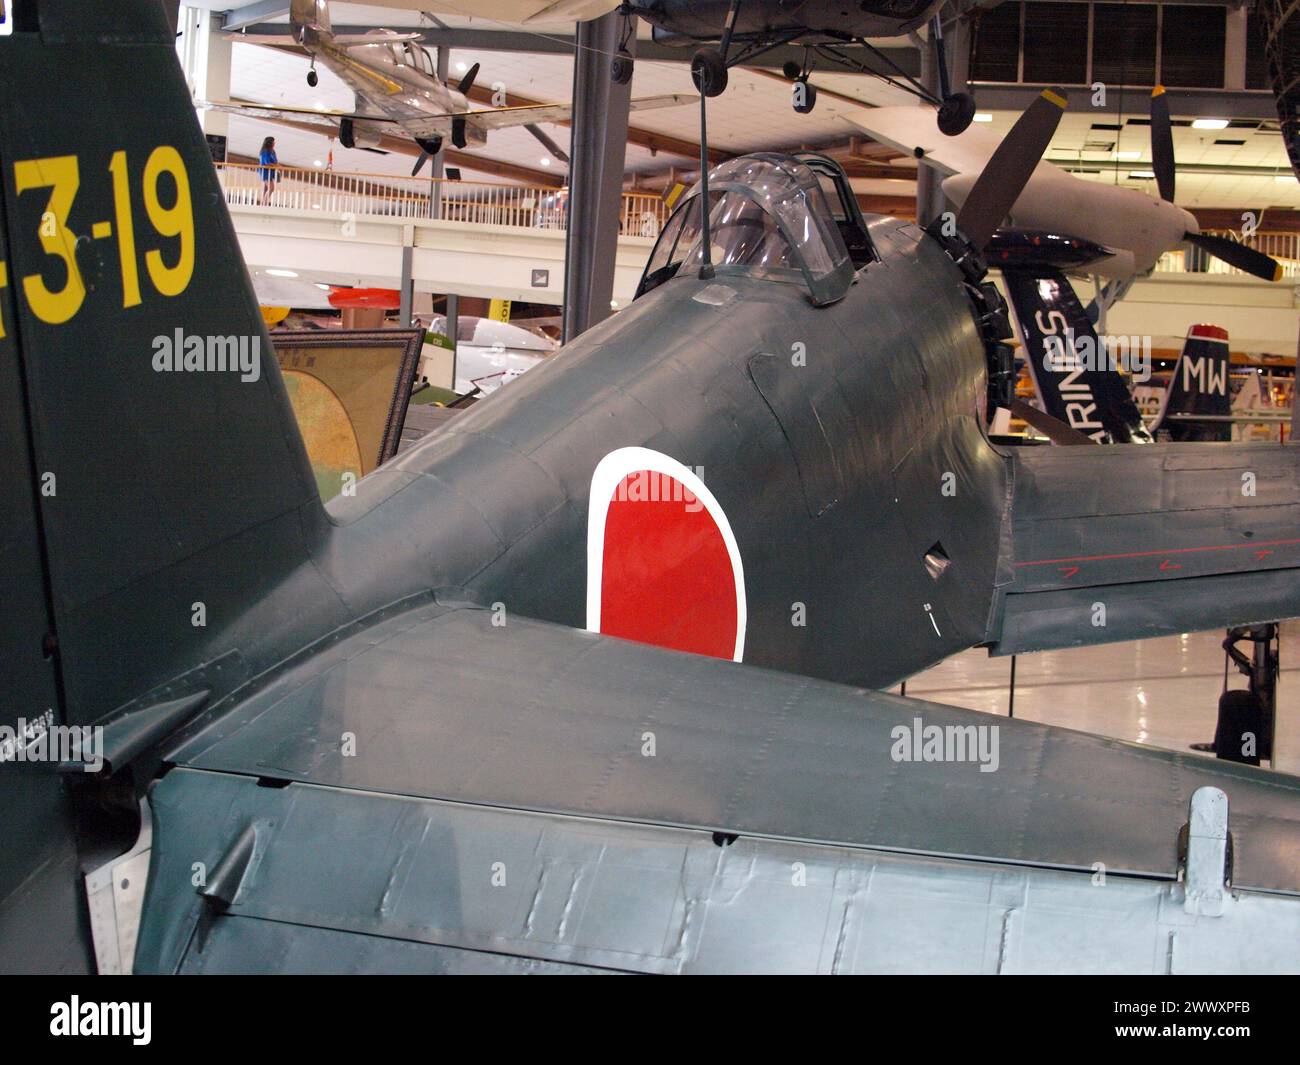 Pensacola, Florida, United States - August 10, 2012: Japanese fighter plane from WW2 in the National Naval Aviation Museum. Stock Photo